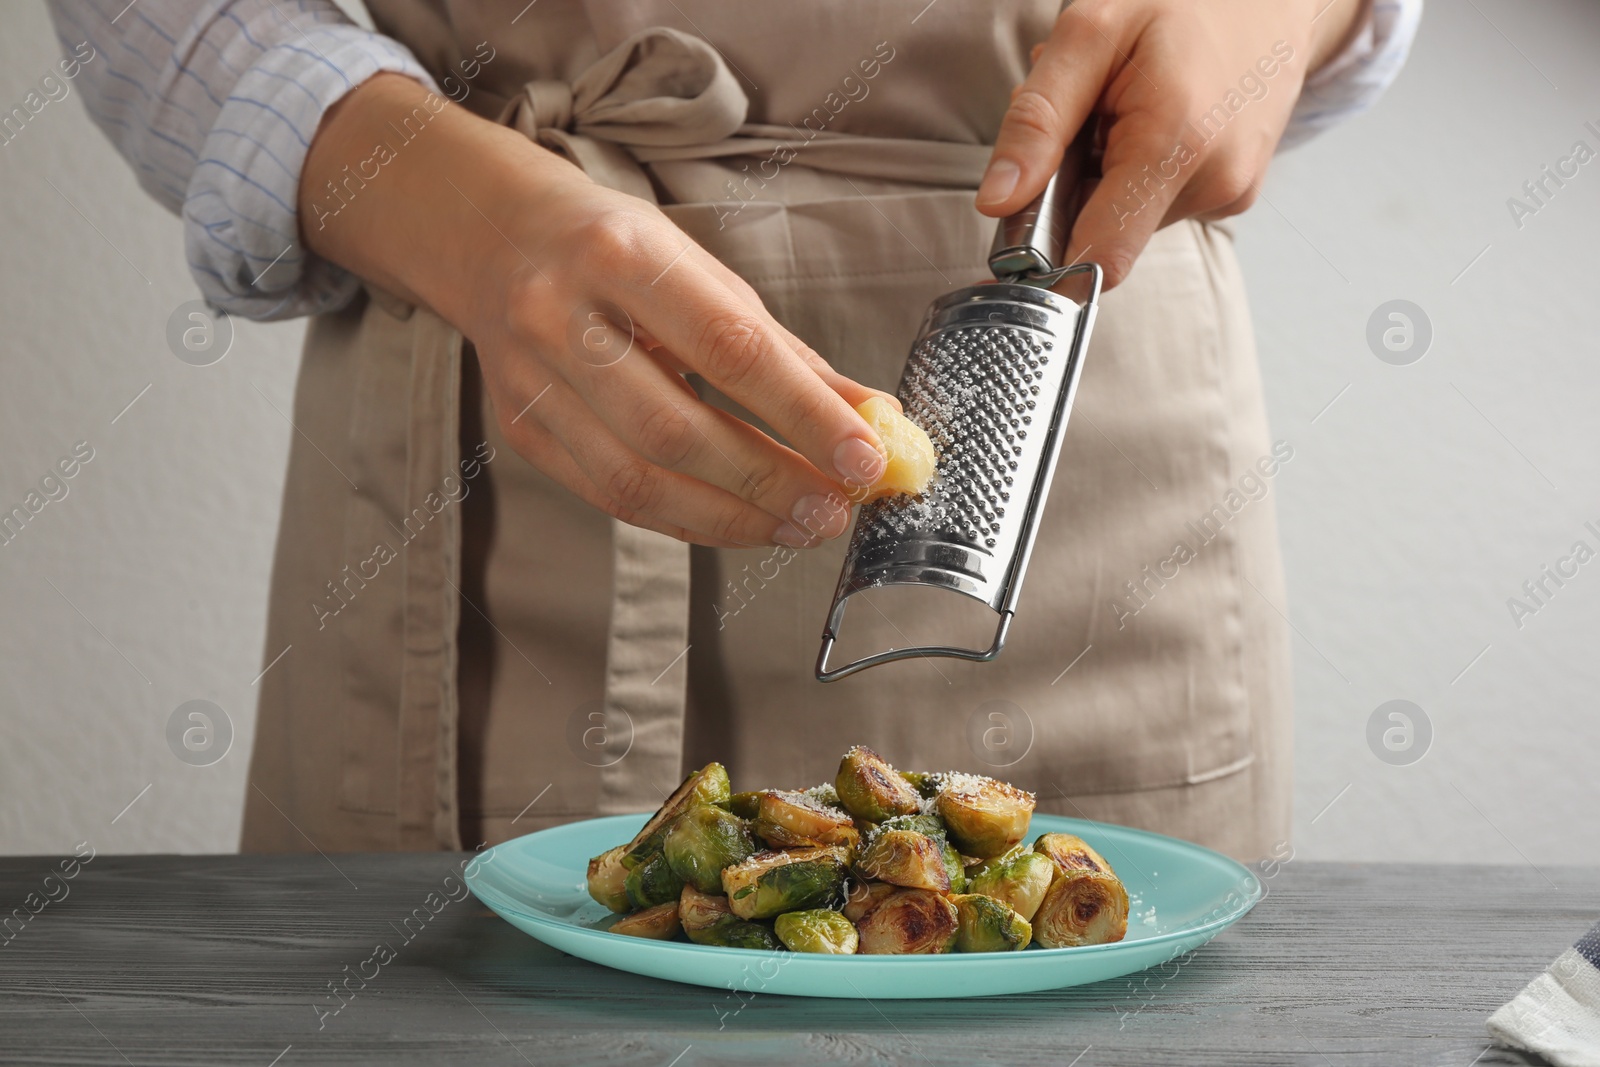 Photo of Woman grating cheese on roasted brussels sprouts at grey wooden table, closeup